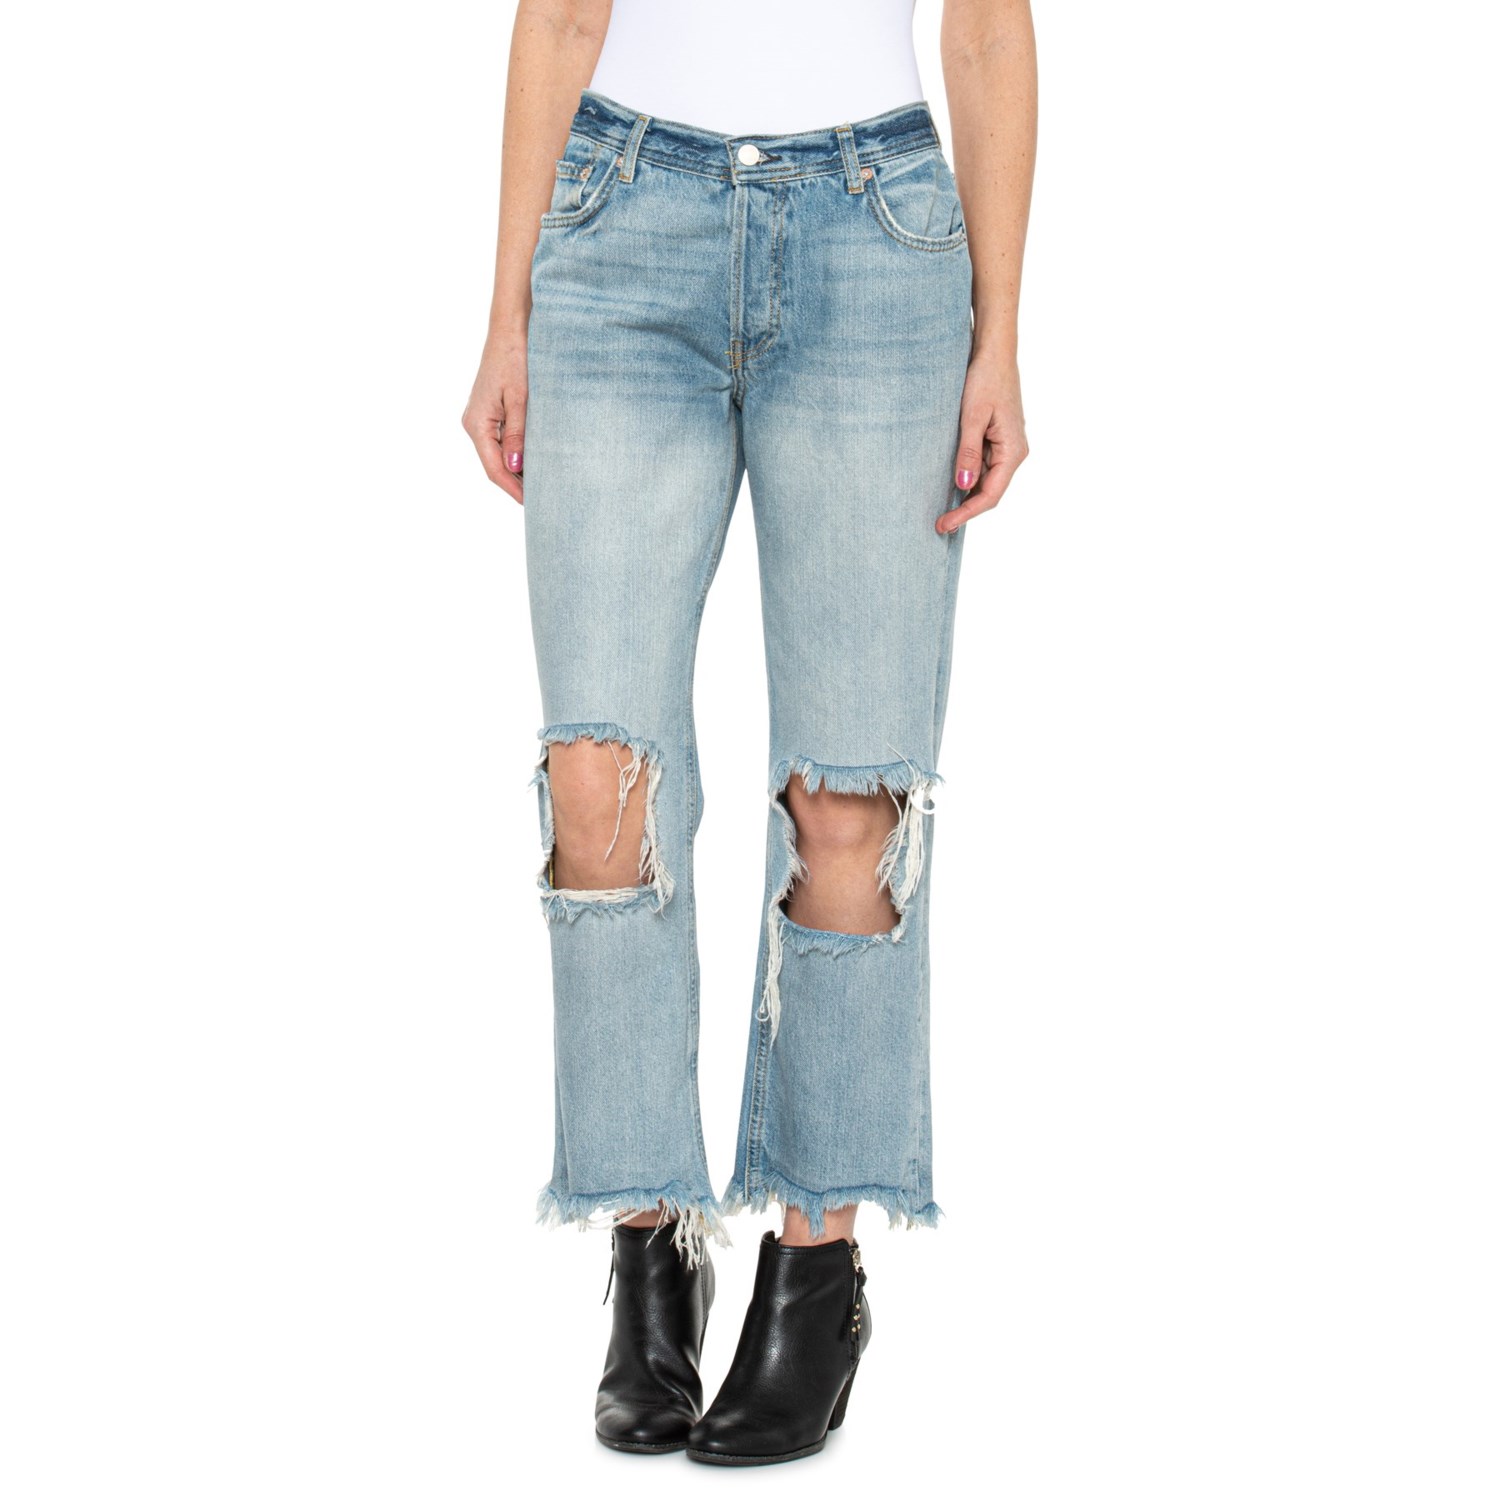 Free People Maggie Jeans - Mid Rise, Straight Leg (For Women)